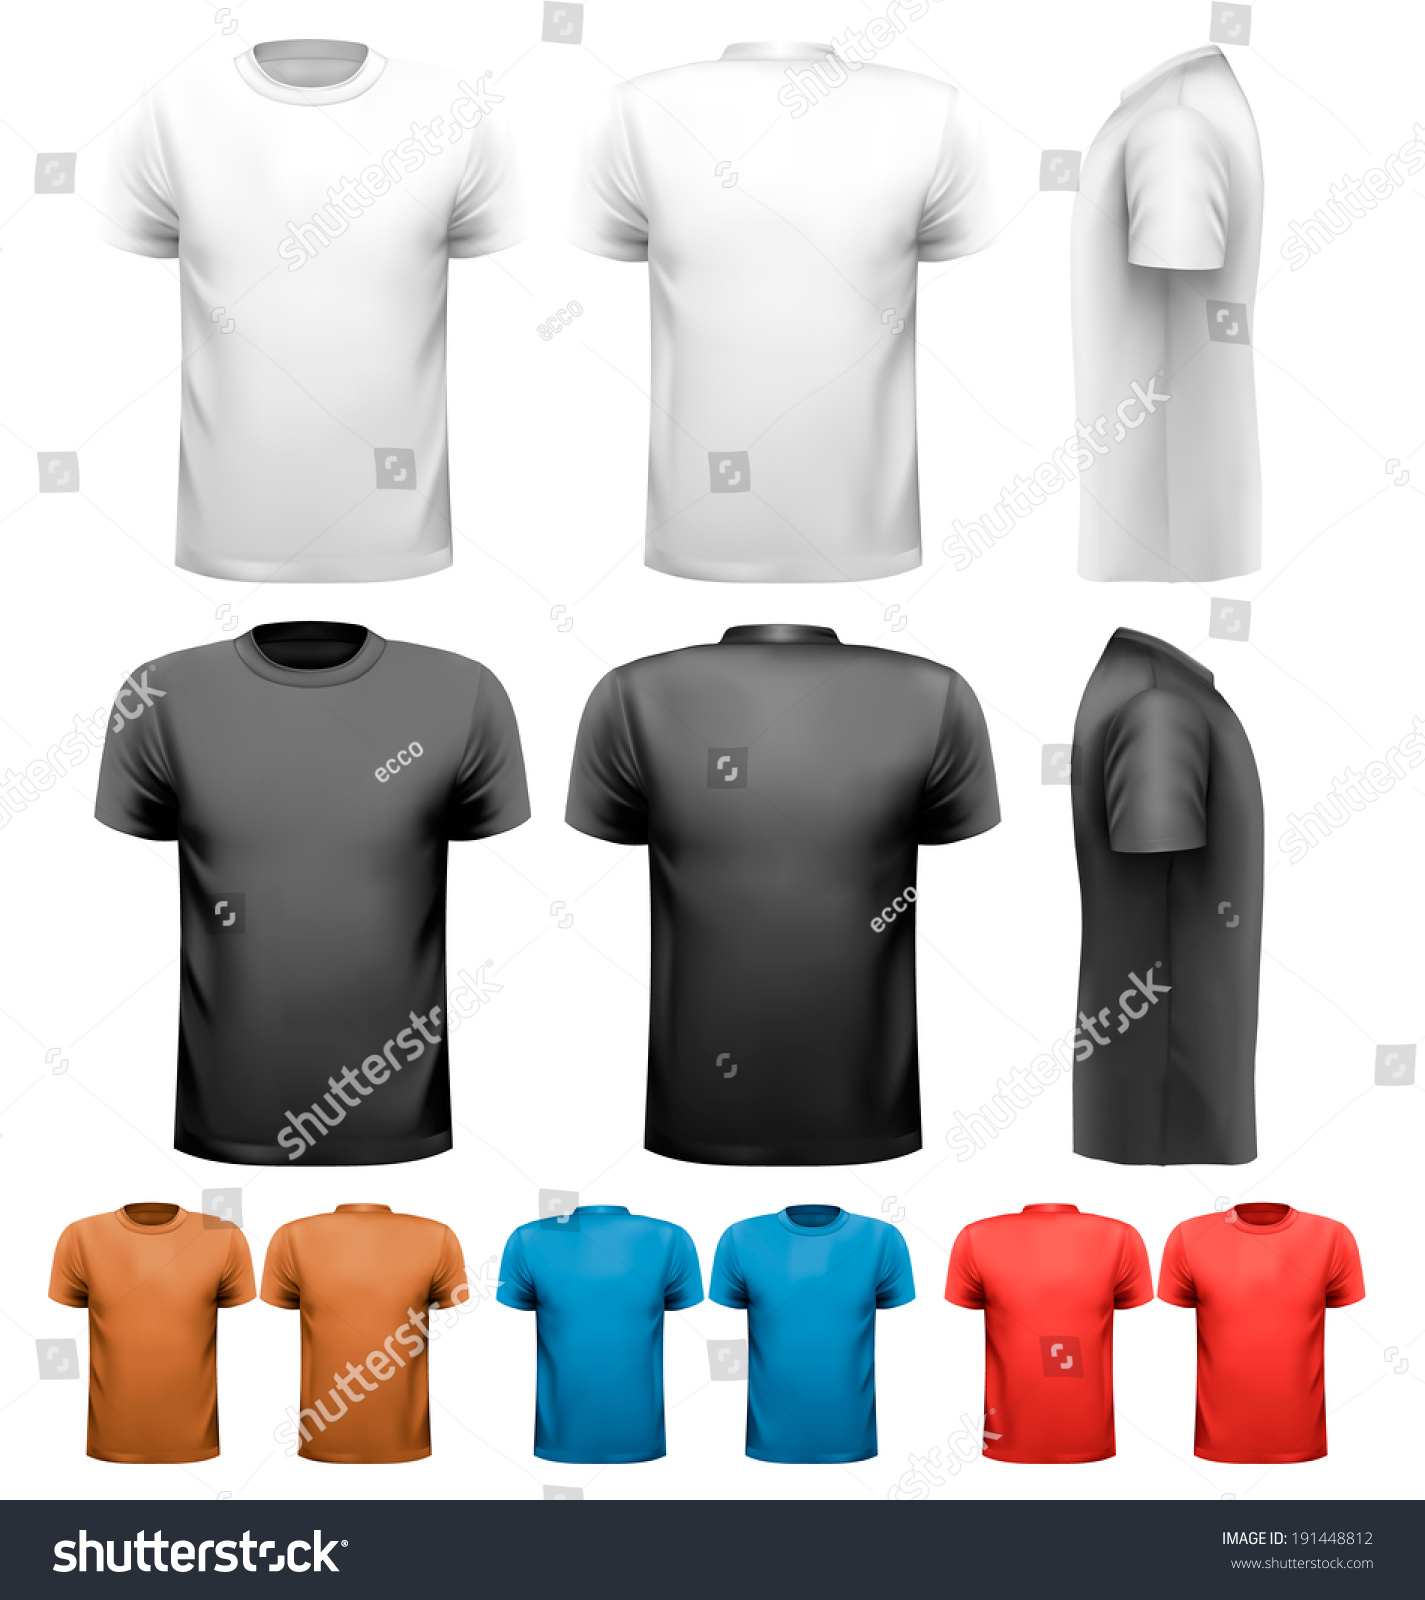 Colorful Male Tshirts Design Template Vector Stock Vector (Royalty Free ...